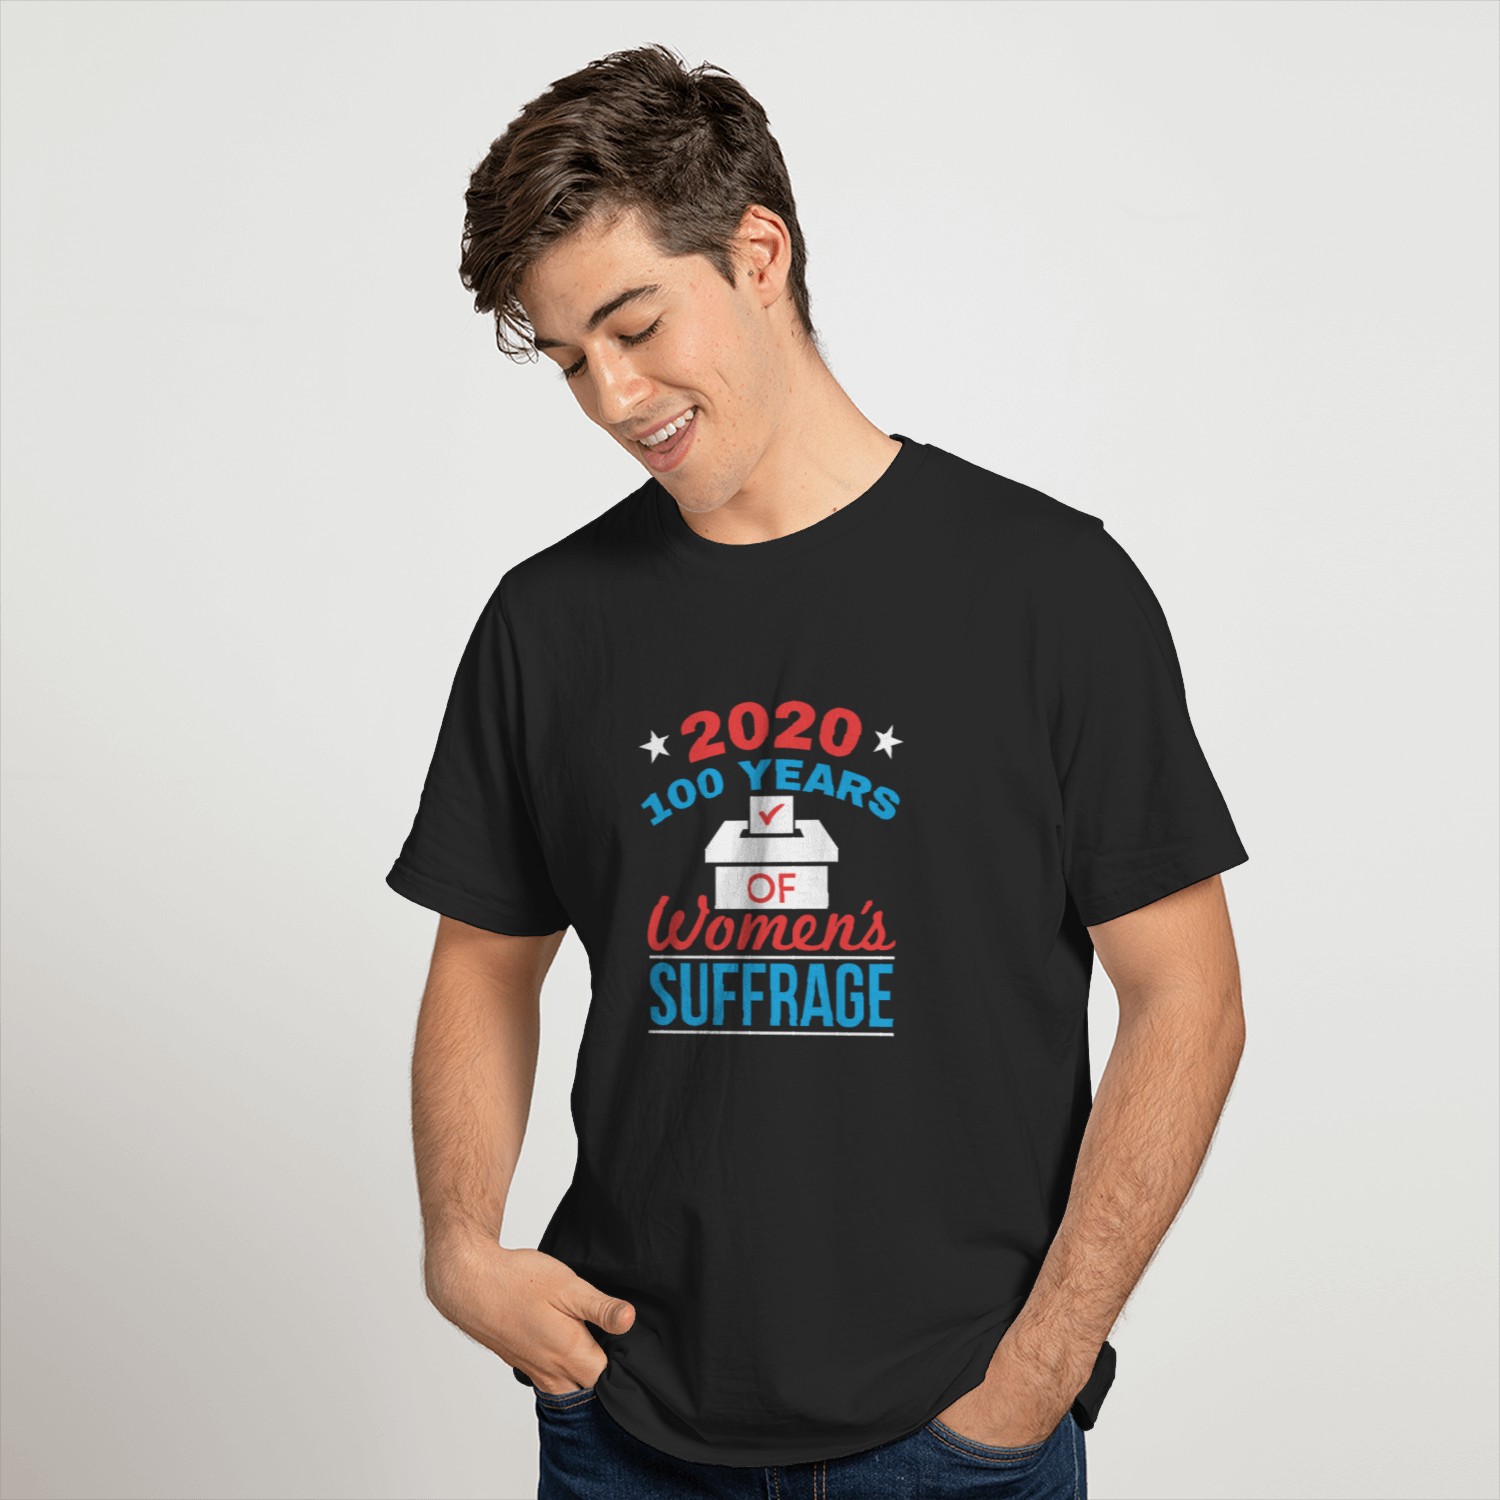 2020 100 Years of Women's Suffrage T-shirt